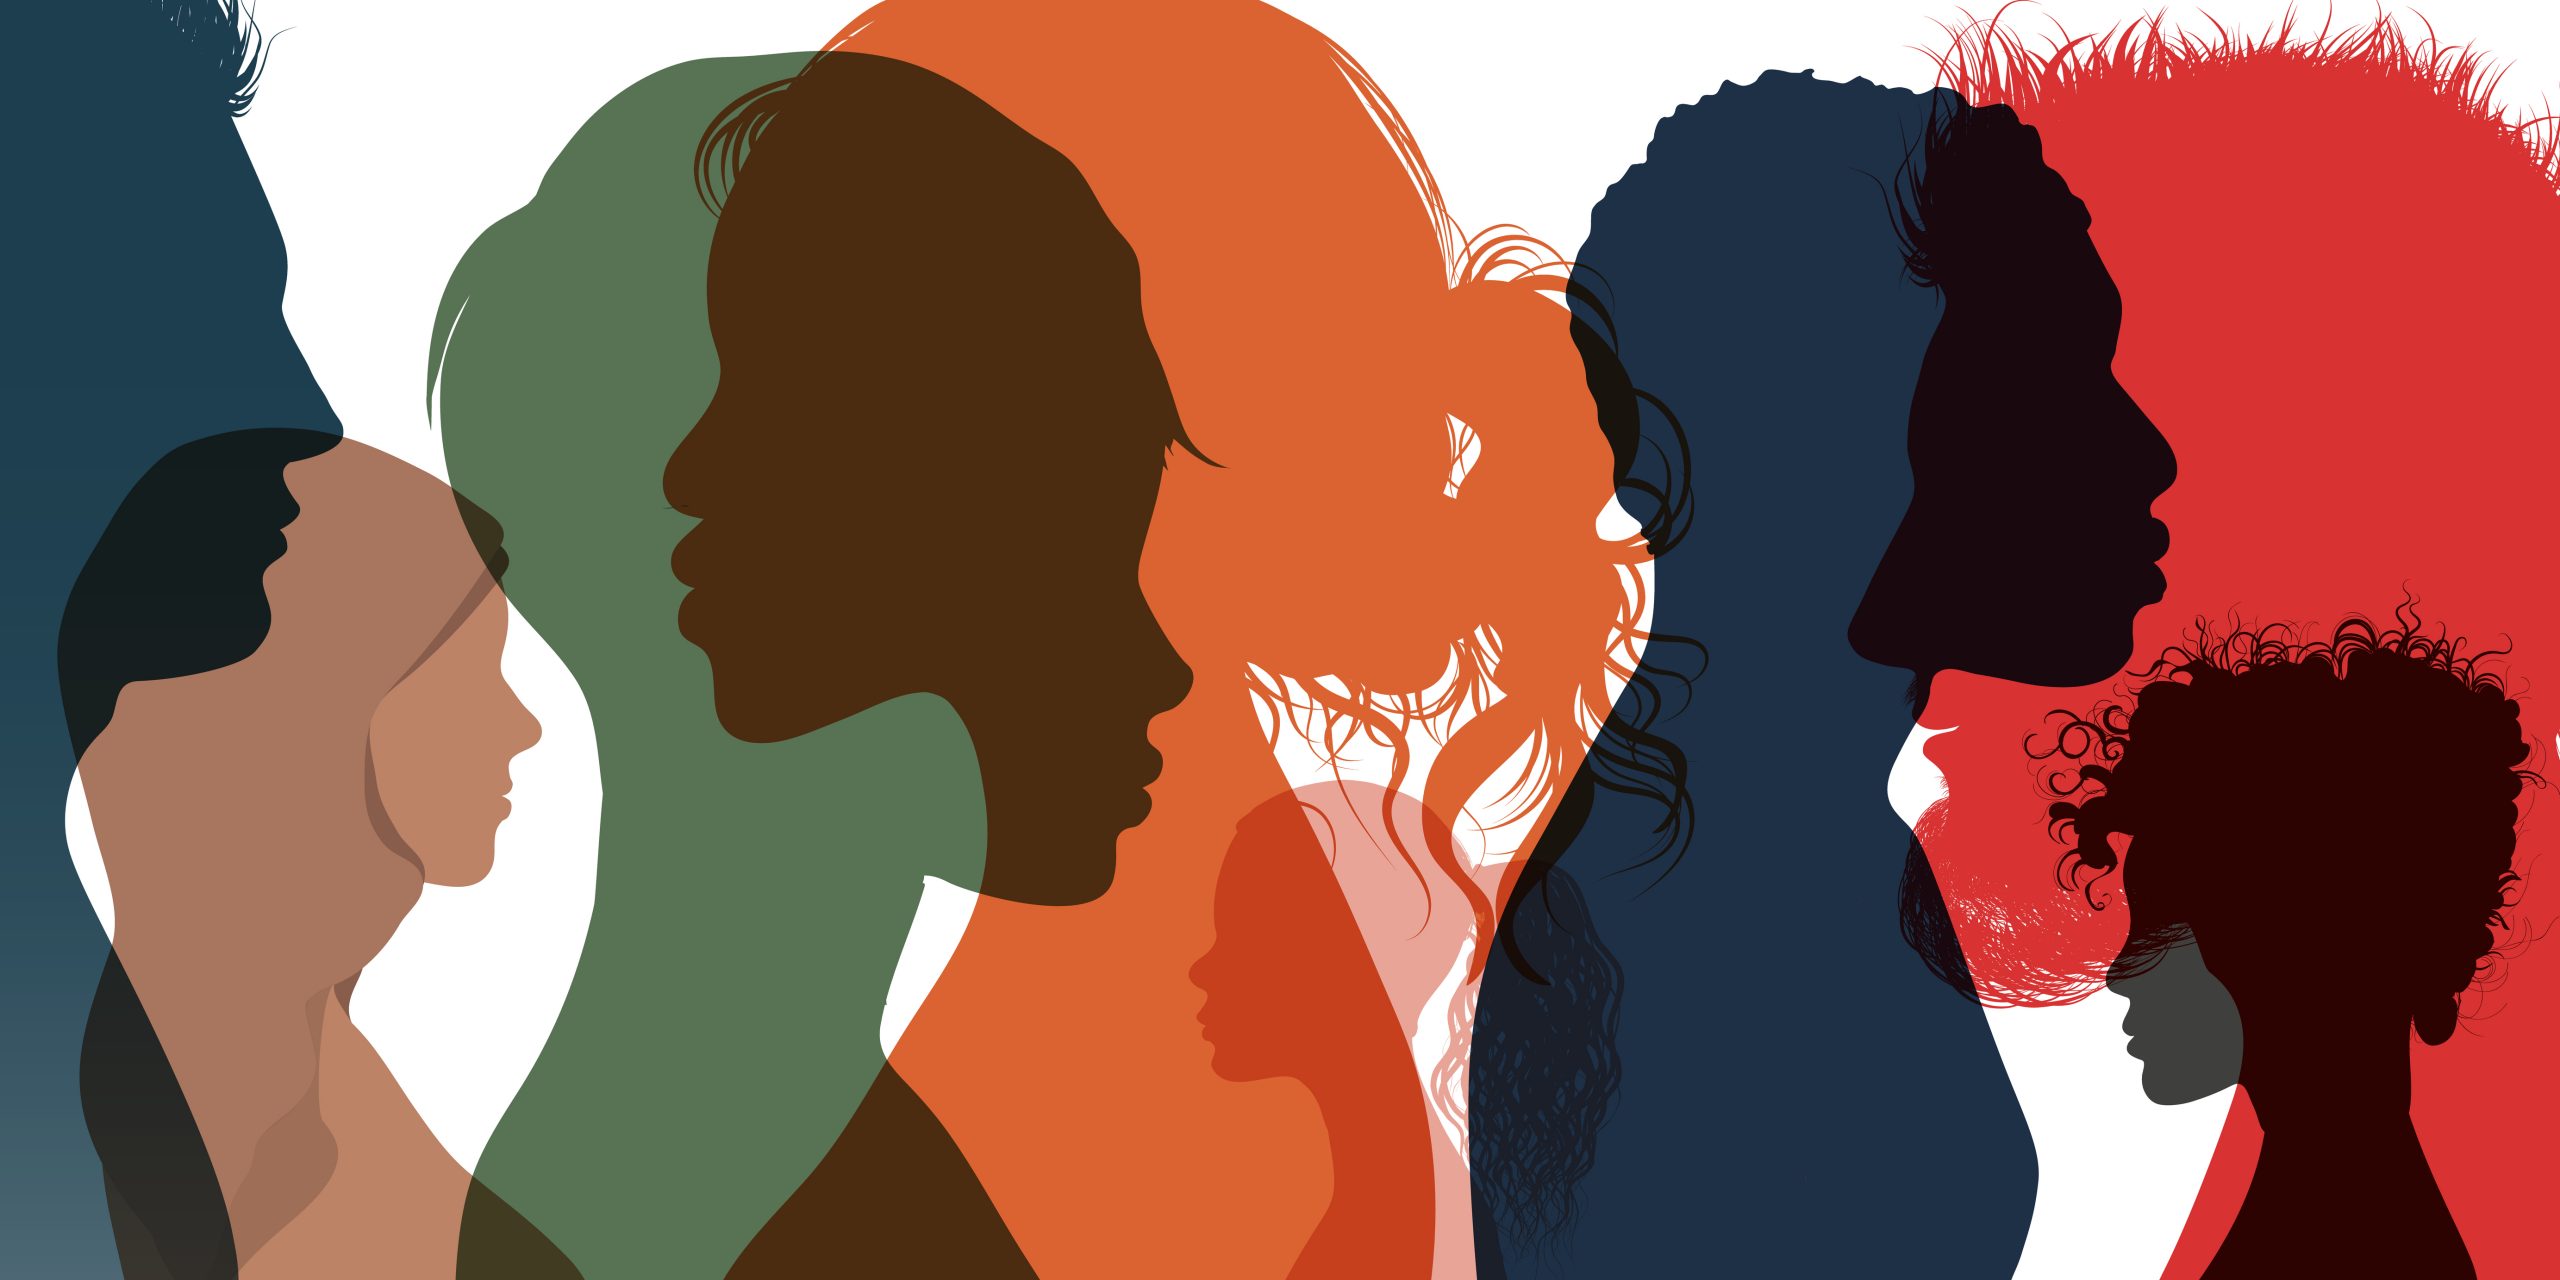 Silhouette,Profile,Group,Of,Men,Women,And,Girl,Of,Diverse